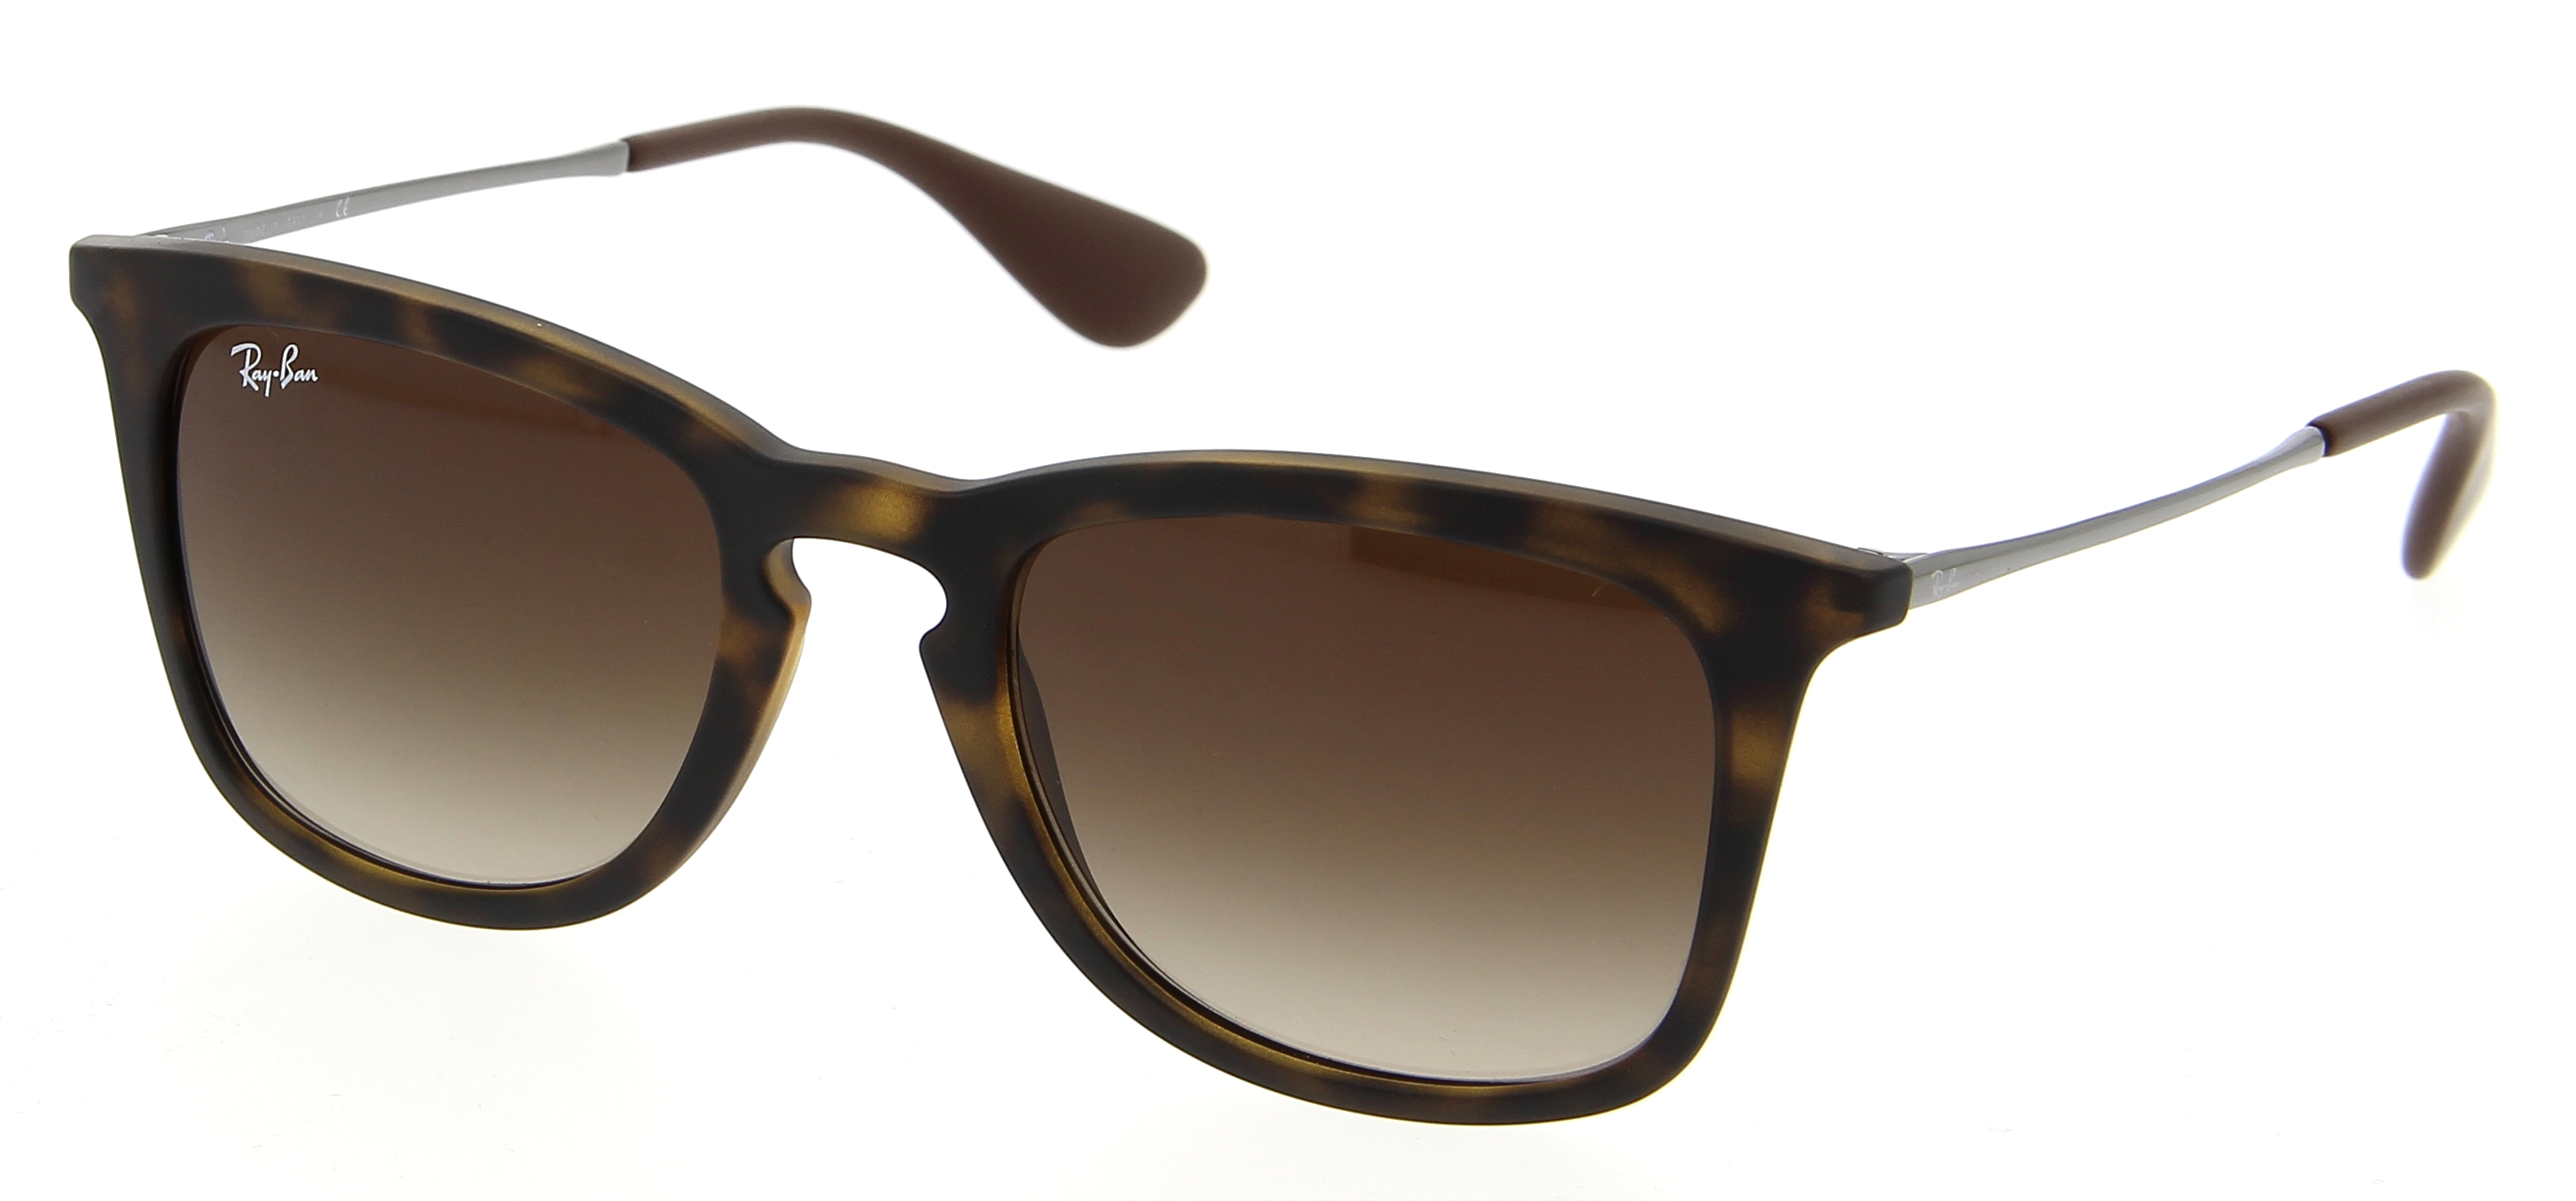 Lunettes de soleil RAY-BAN RB 4221 865/13 Youngster